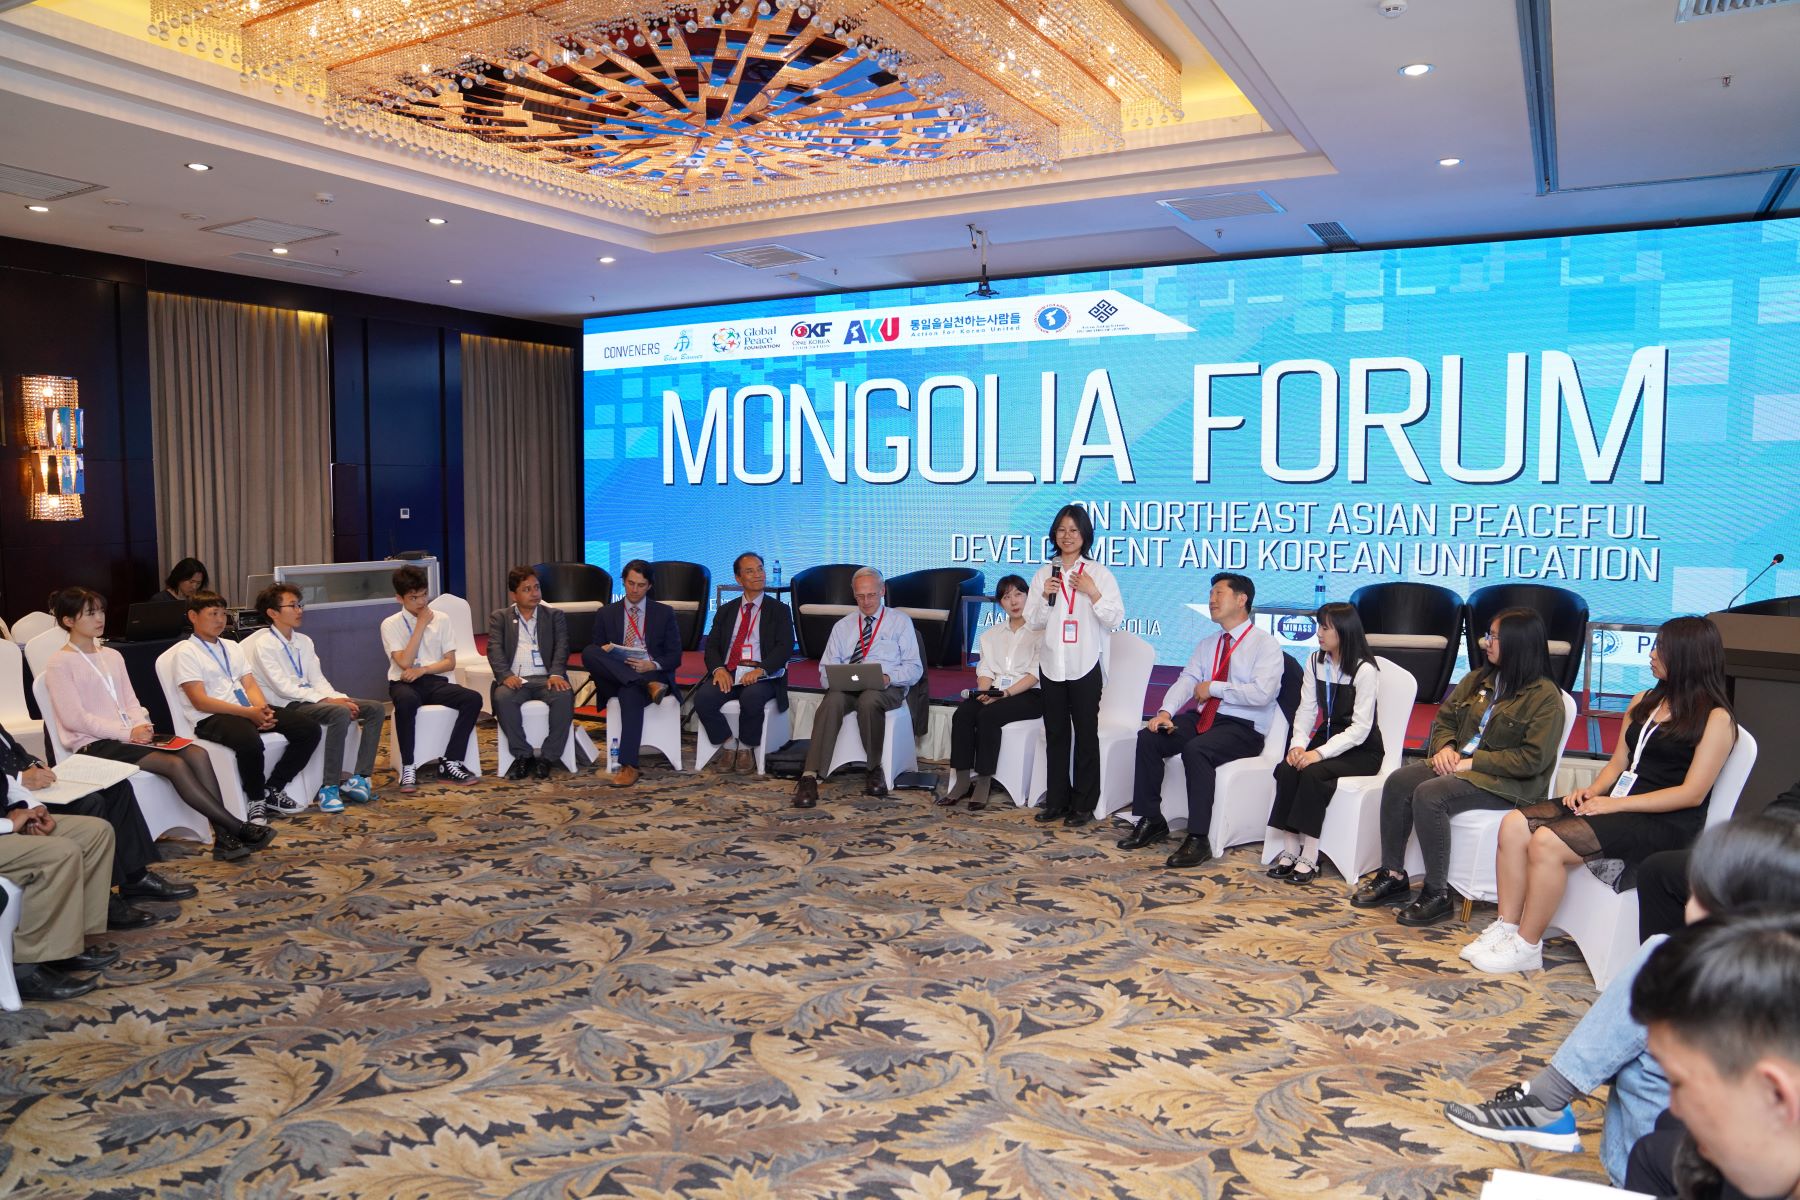 A group of people from Mongolia sitting around a table in front of a large screen.